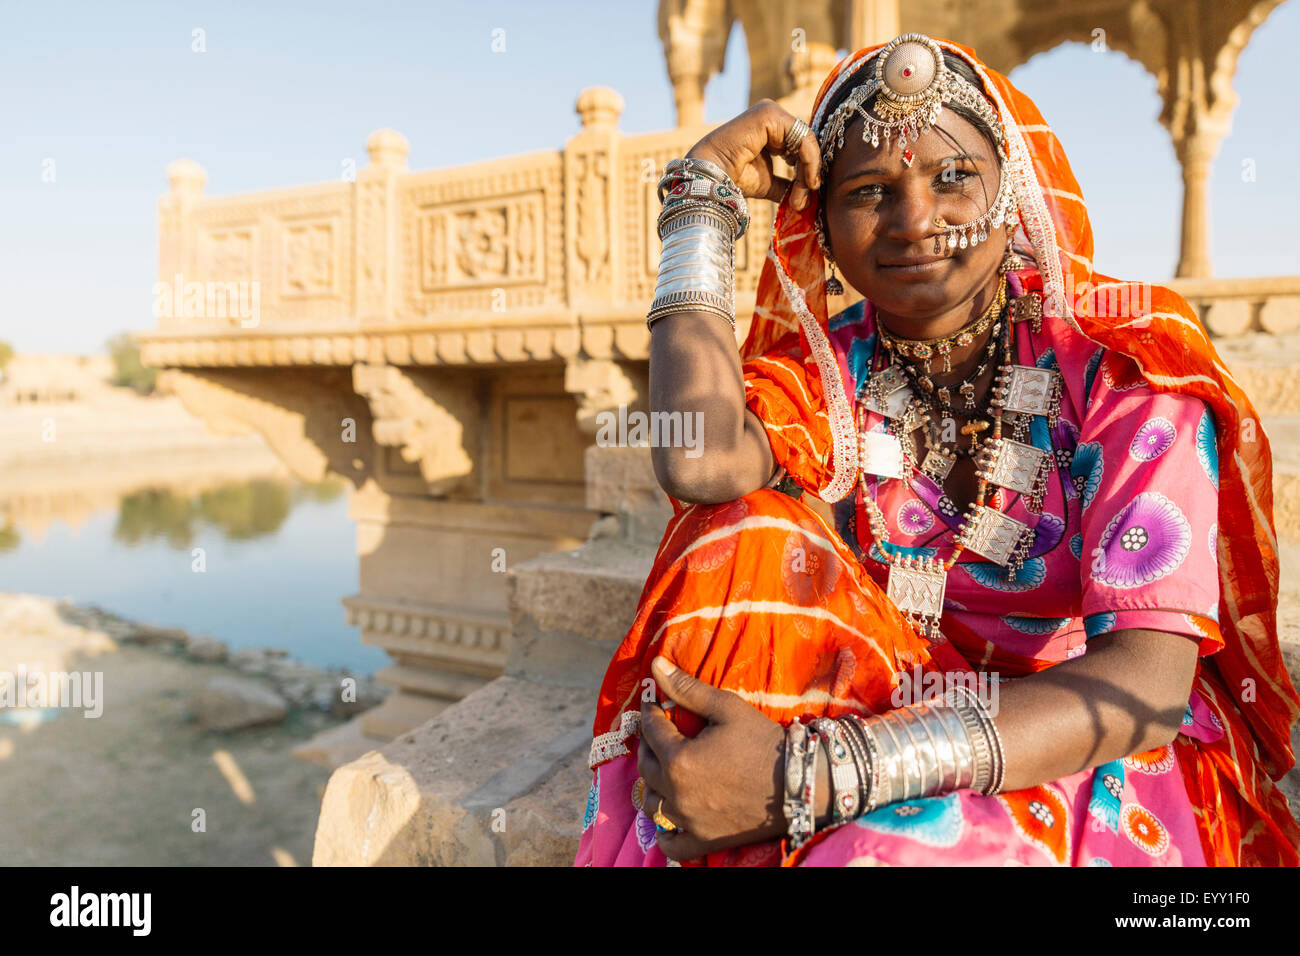 Indian woman wearing traditional jewelry sitting near monument, Jaisalmer, Rajasthan, India Stock Photo